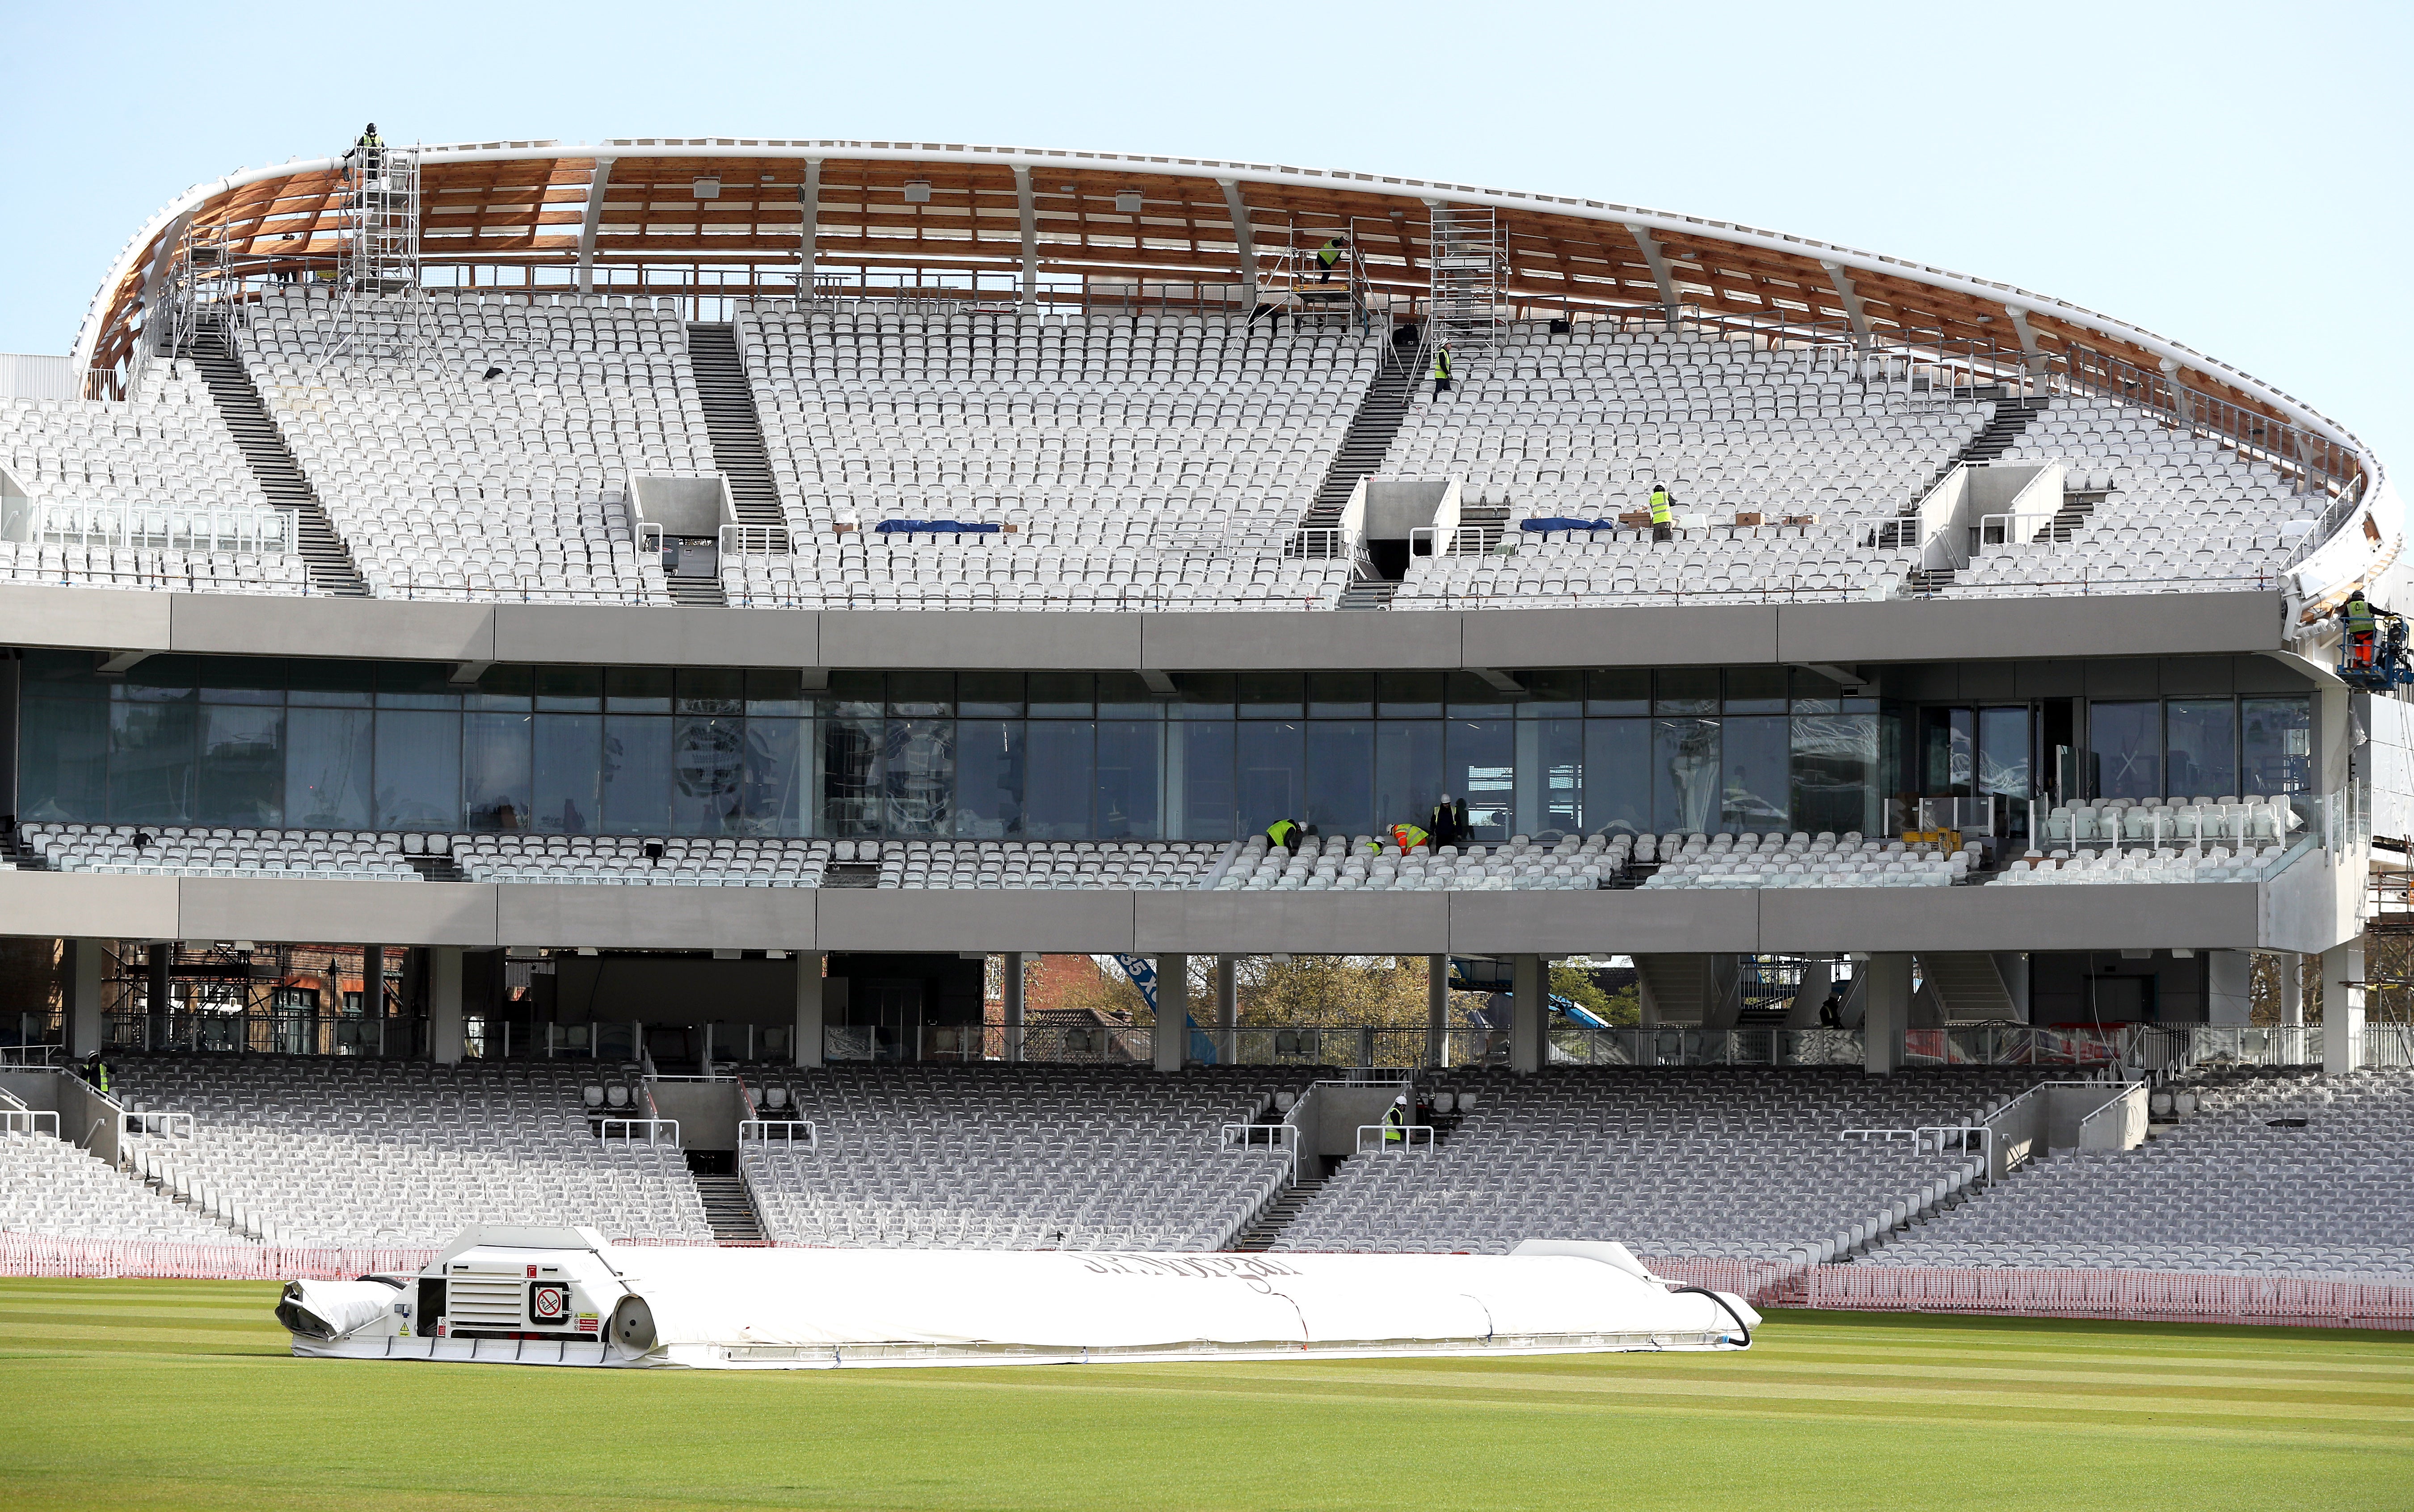 Lord's will be at full capacity for the one-day international between England and Pakistan on July 10